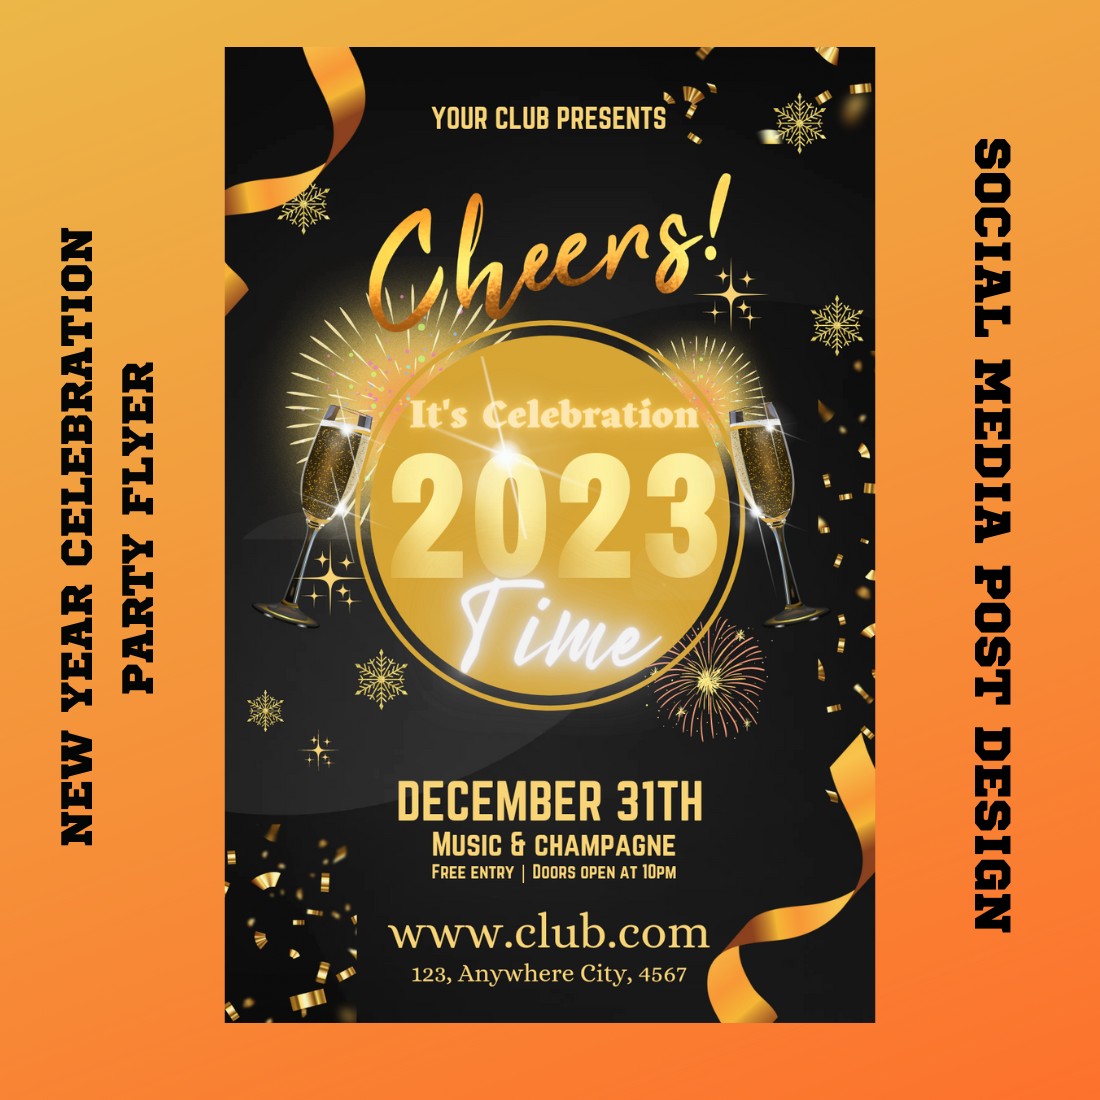 New Year Party FLyer Design cover image.